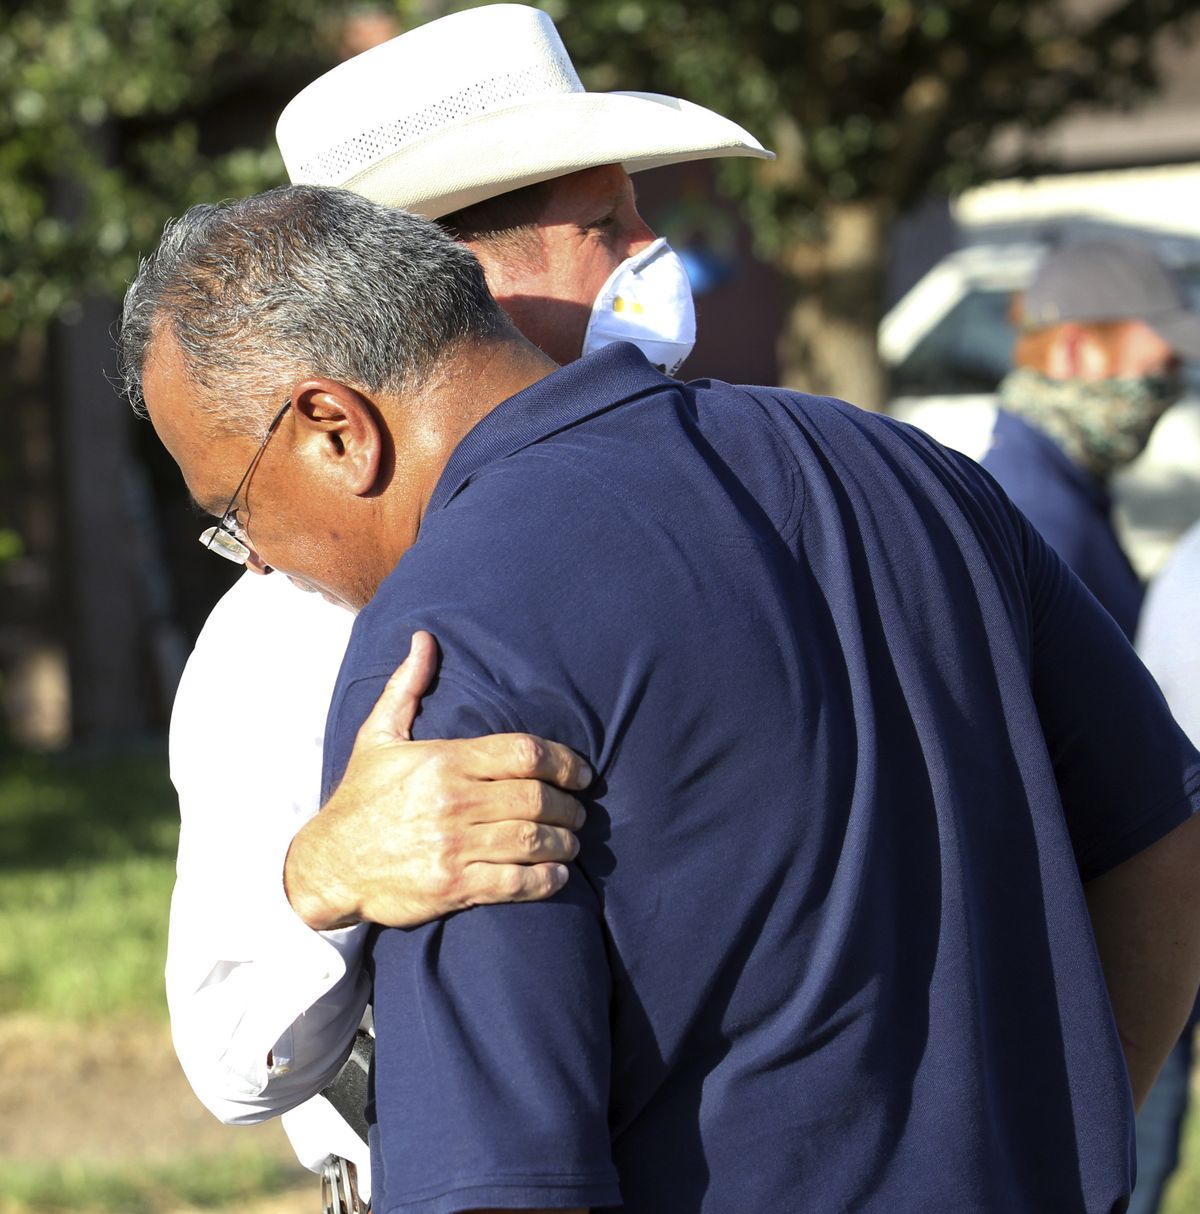 McAllen Police Chief Victor Rodriguez, foreground, is hugged by a Texas Ranger after speaking at a news conference near the scene of a shooting where two of his officers were shot and killed reportedly responding to a disturbance call, Saturday, July 11, 2020, in McAllen, Texas.  (Delcia Lopez)